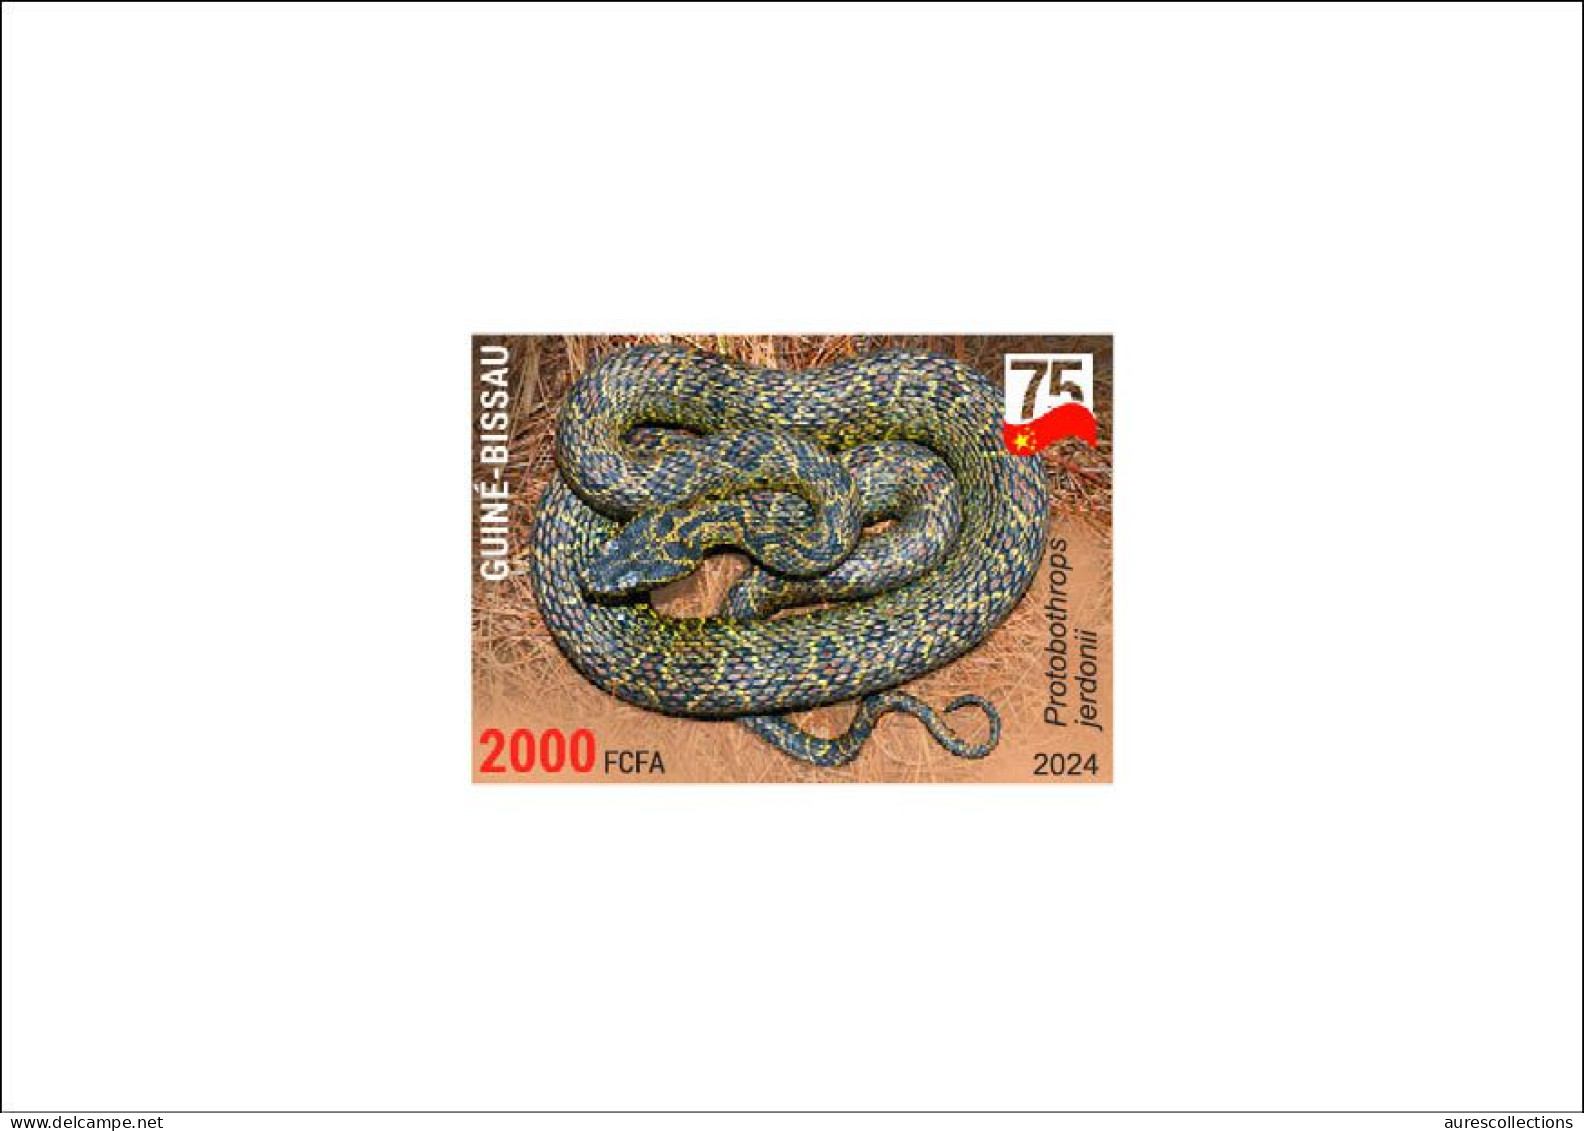 GUINEA BISSAU 2024 DELUXE PROOF - CHINA AMPHIBIANS & REPTILES - SNAKE SNAKES VIPER SERPENTS - CHINA 75 ANNIV. - Serpientes